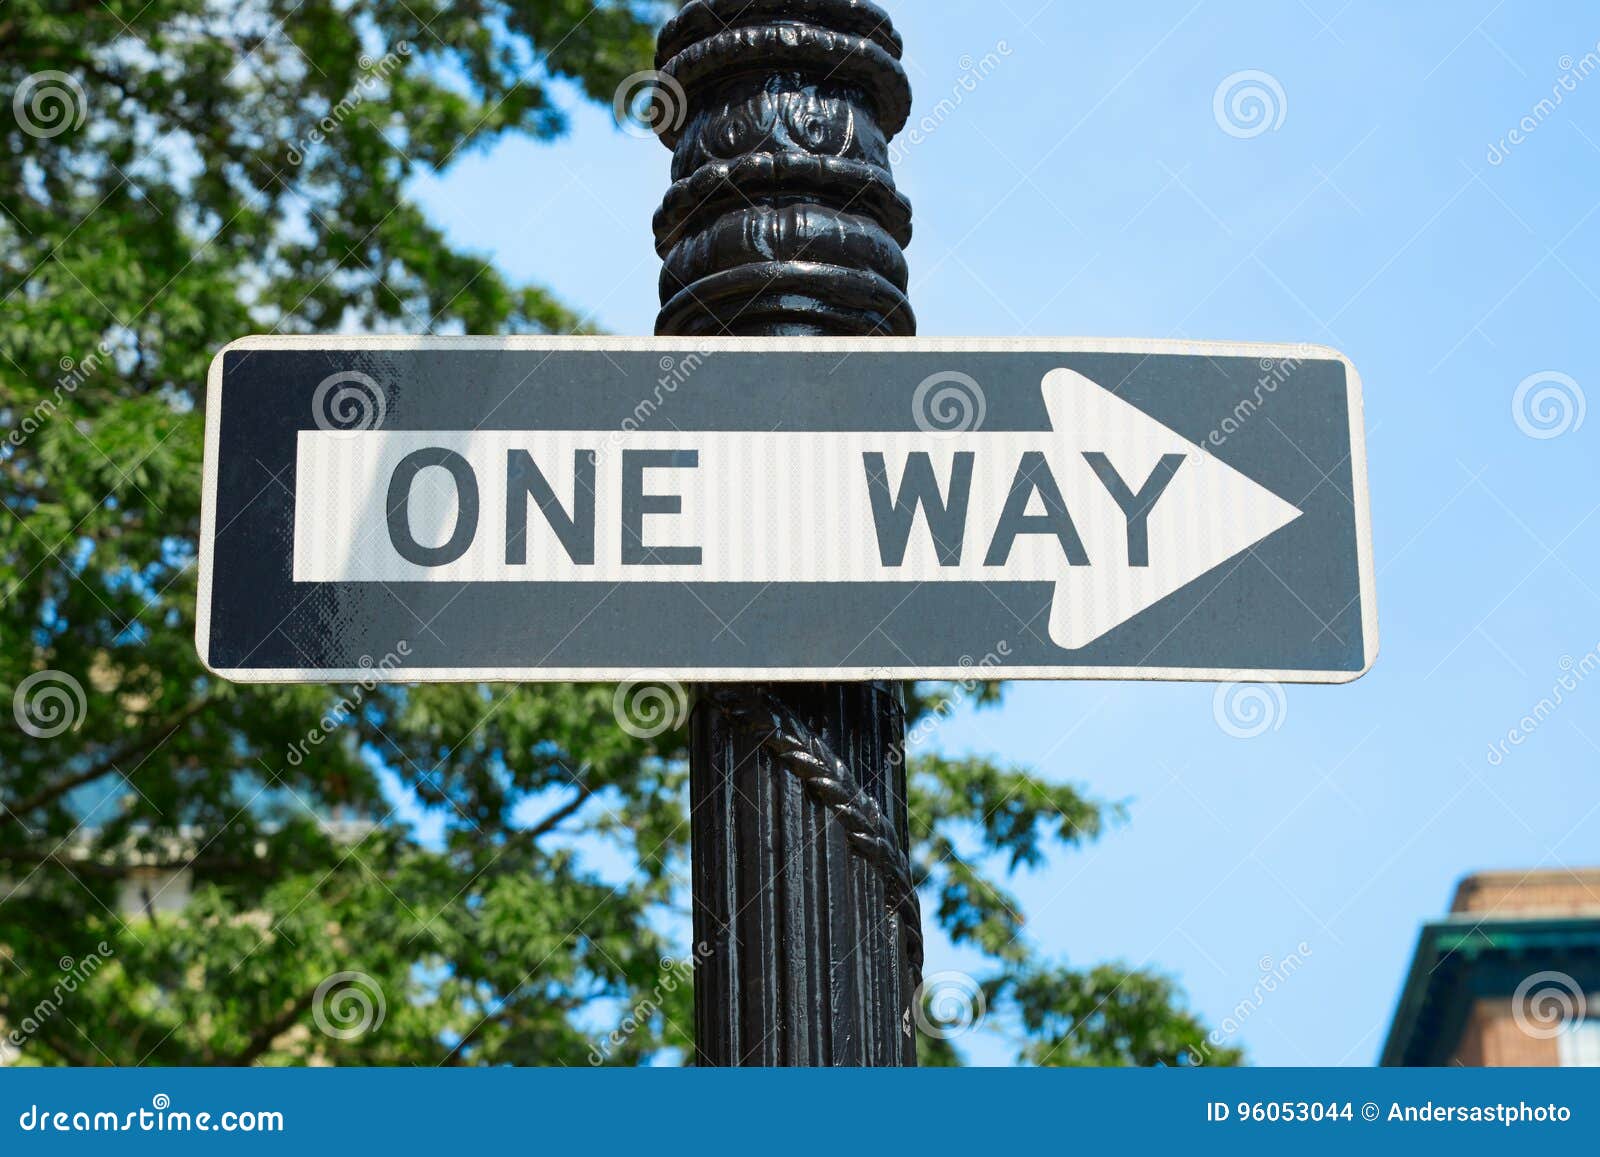 One Way Street Sign In New York With Green Tree Branches Stock Photo ... One Way Street Signs